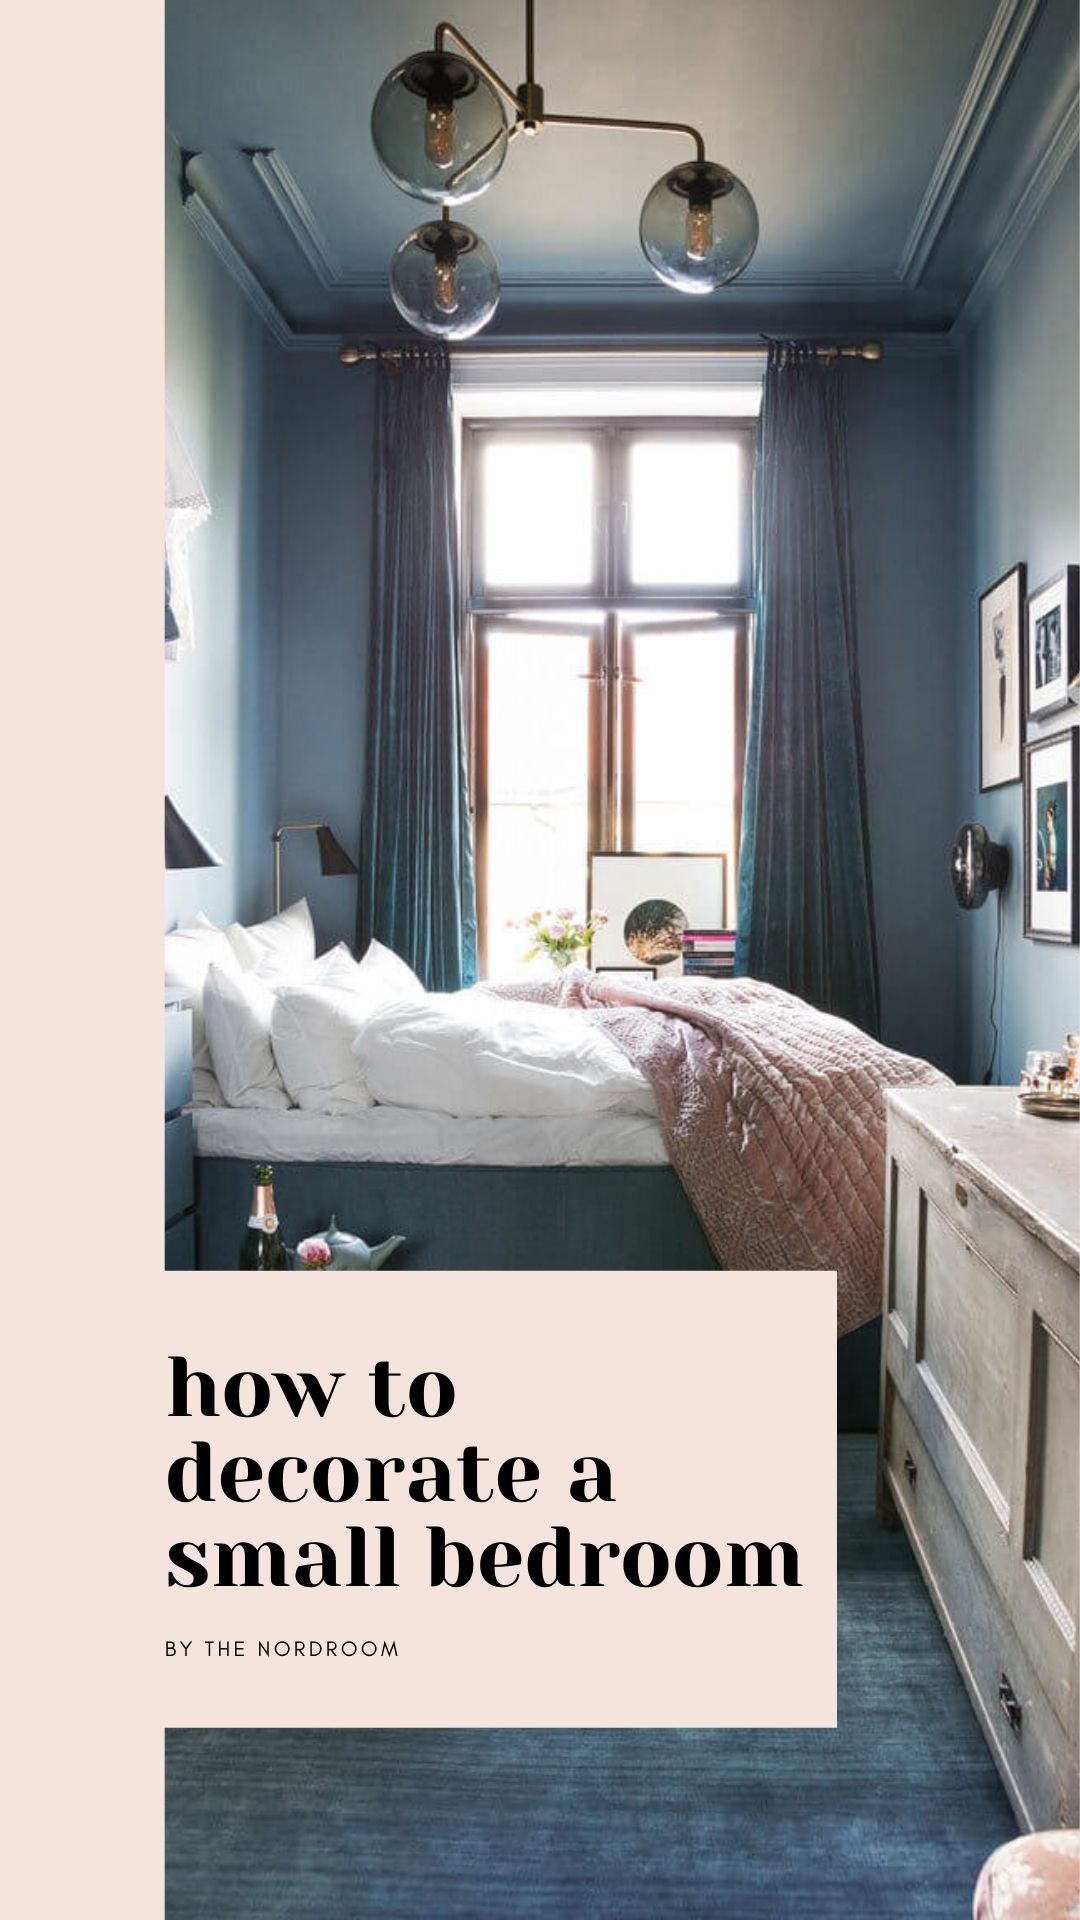 How To Decorate A Small Bedroom   The Nordroom